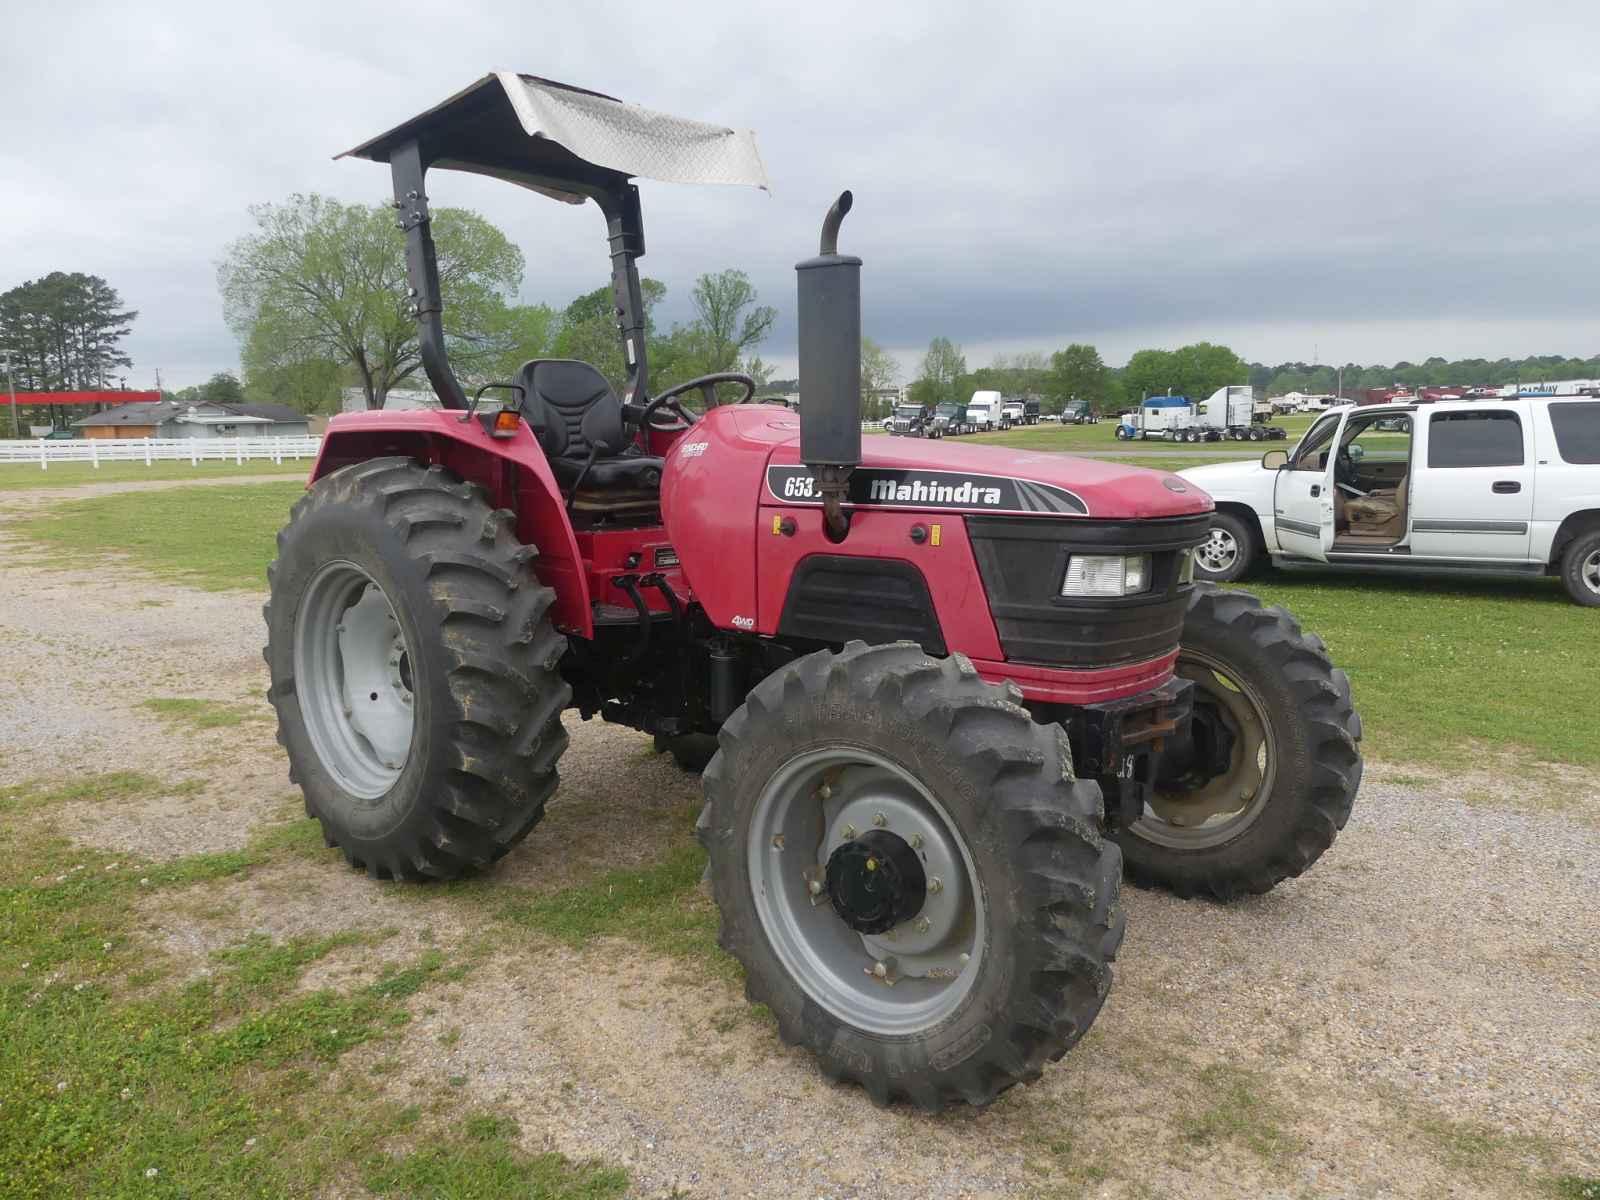 Mahindra 6530 MFWD Tractor, s/n P30T1655: Rollbar Canopy, Syncro Shuttle, 3